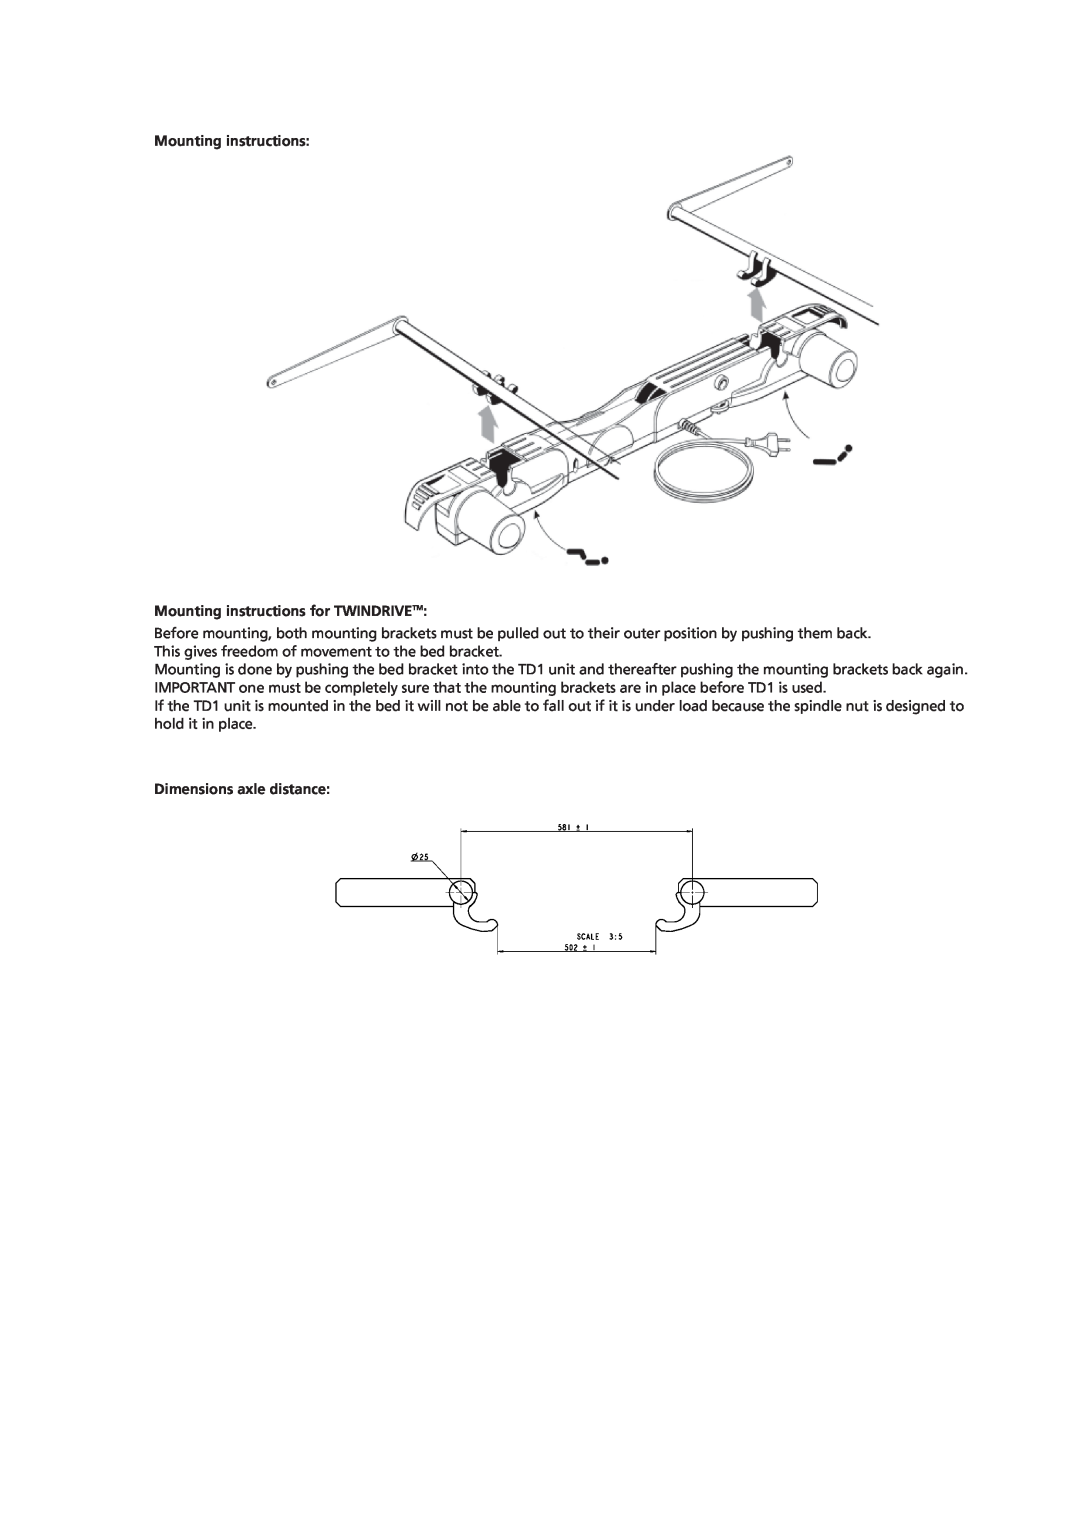 Linak TD1 manual Mounting instructions for TWINDRIVETM, Dimensions axle distance 